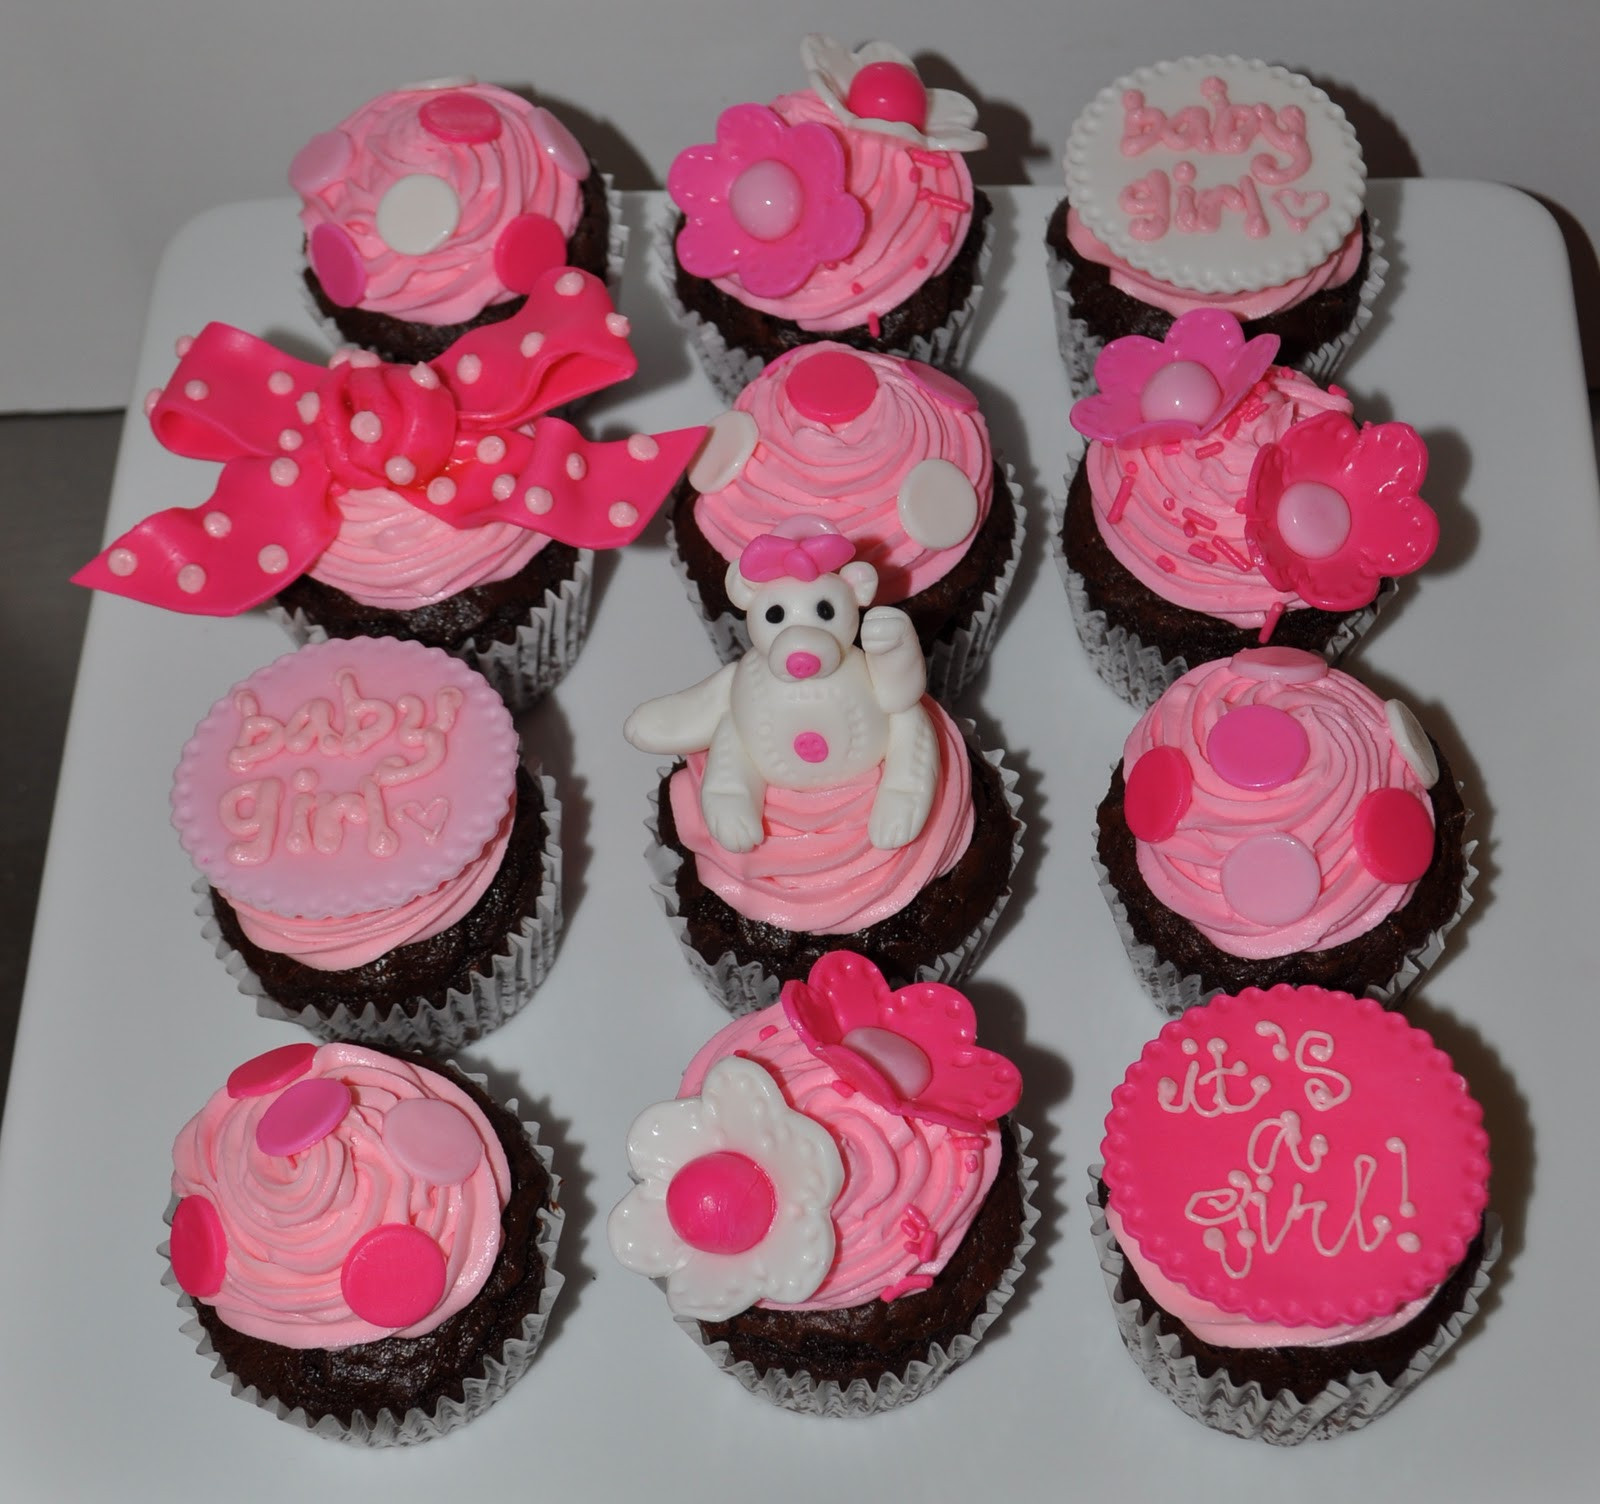 Baby Shower Cupcakes For Girls
 Leah s Sweet Treats Pink Baby Girl Shower Cupcakes